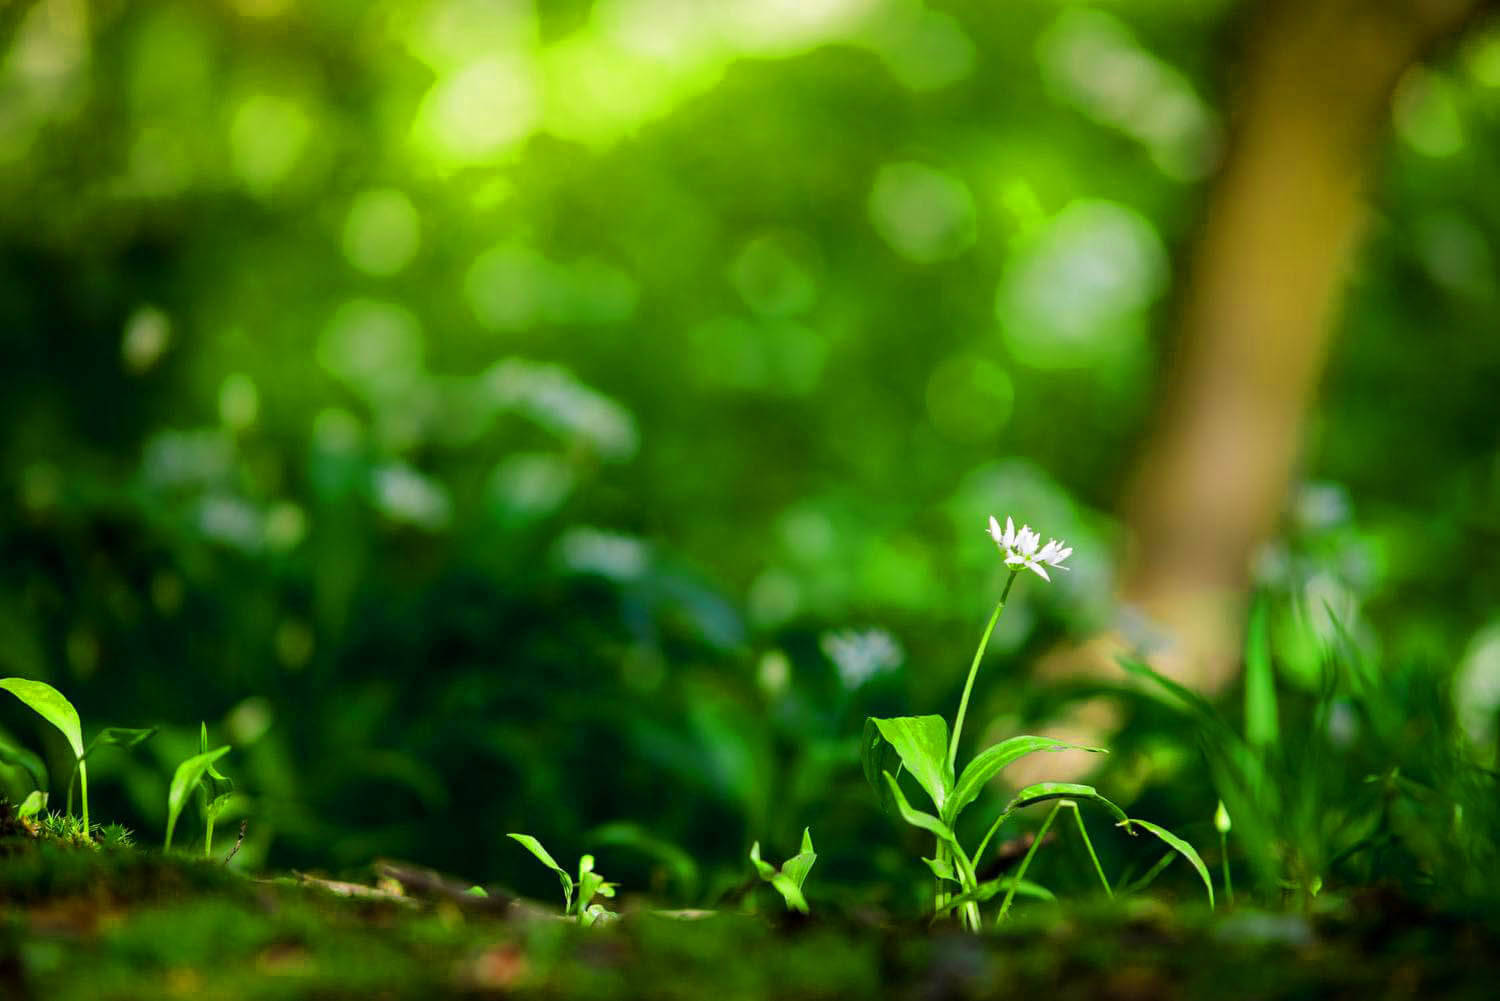 Hd Photography Of A Single Flower Growing By The Forest Wallpaper